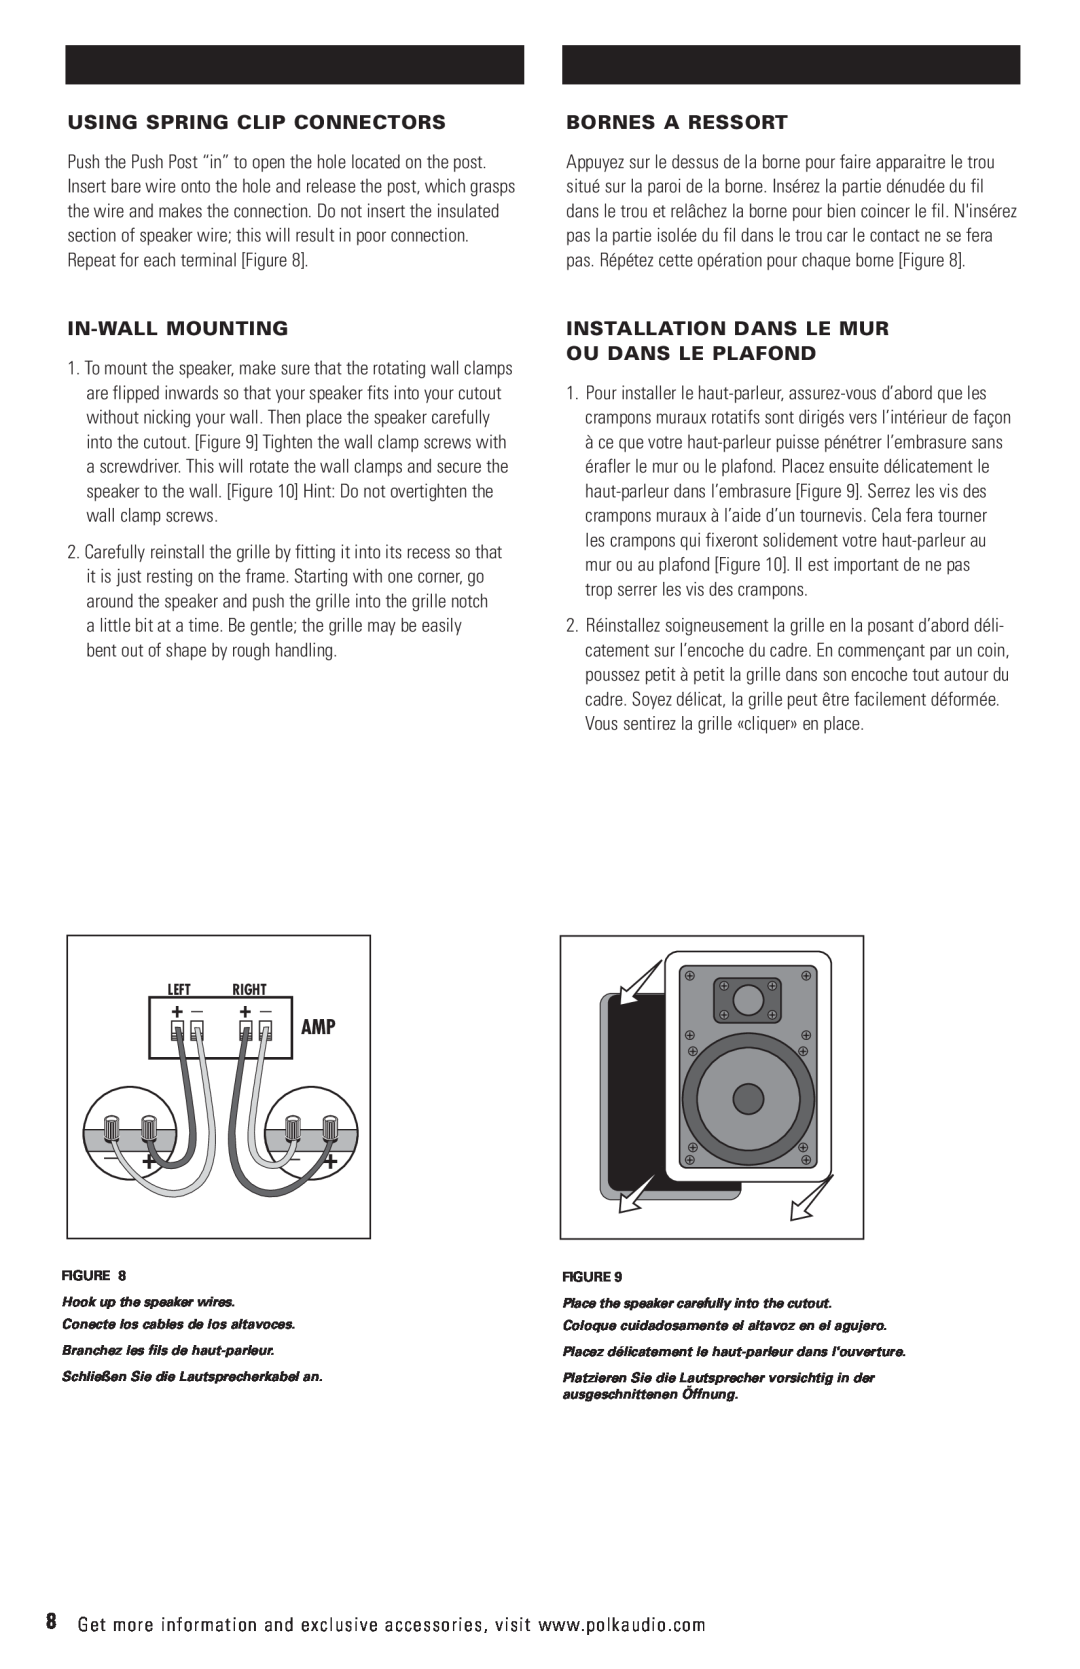 Polk Audio RC6S owner manual Using Spring Clip Connectors, Bornes A Ressort, In-Wallmounting 